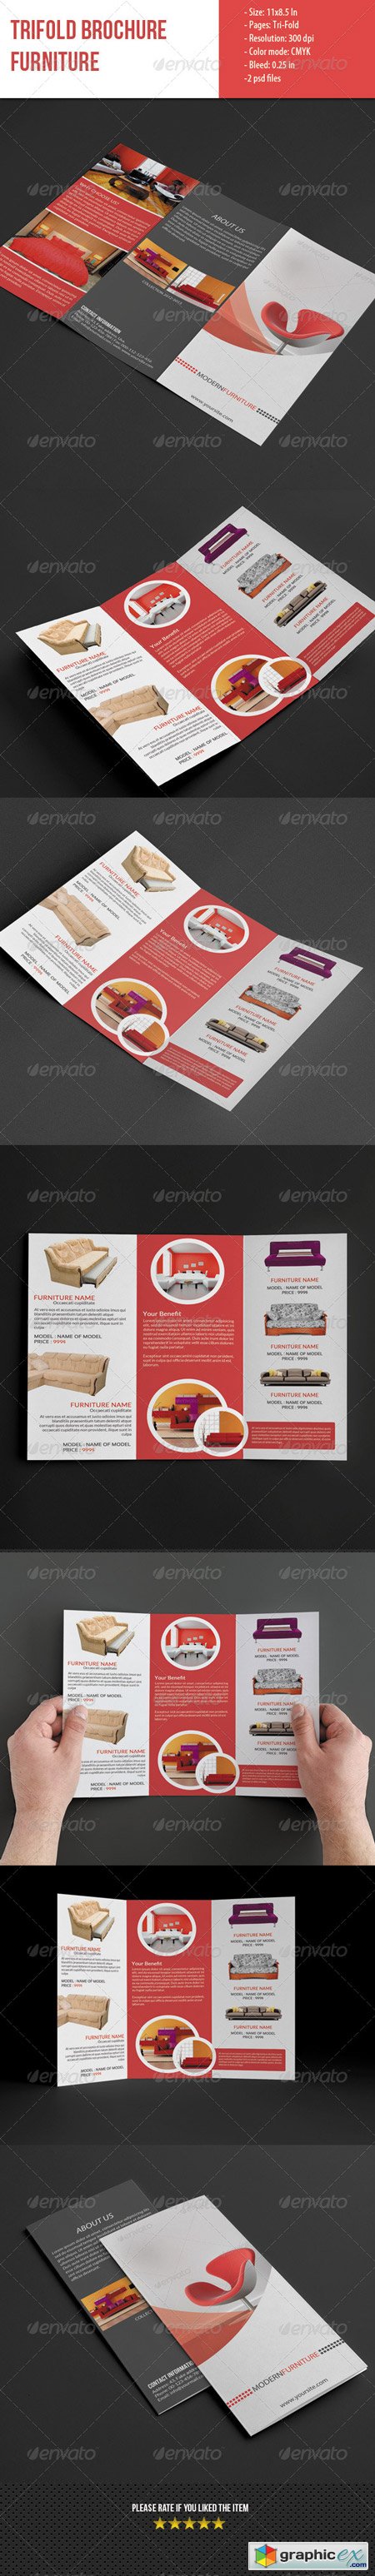 Trifold Brochure for Furniture